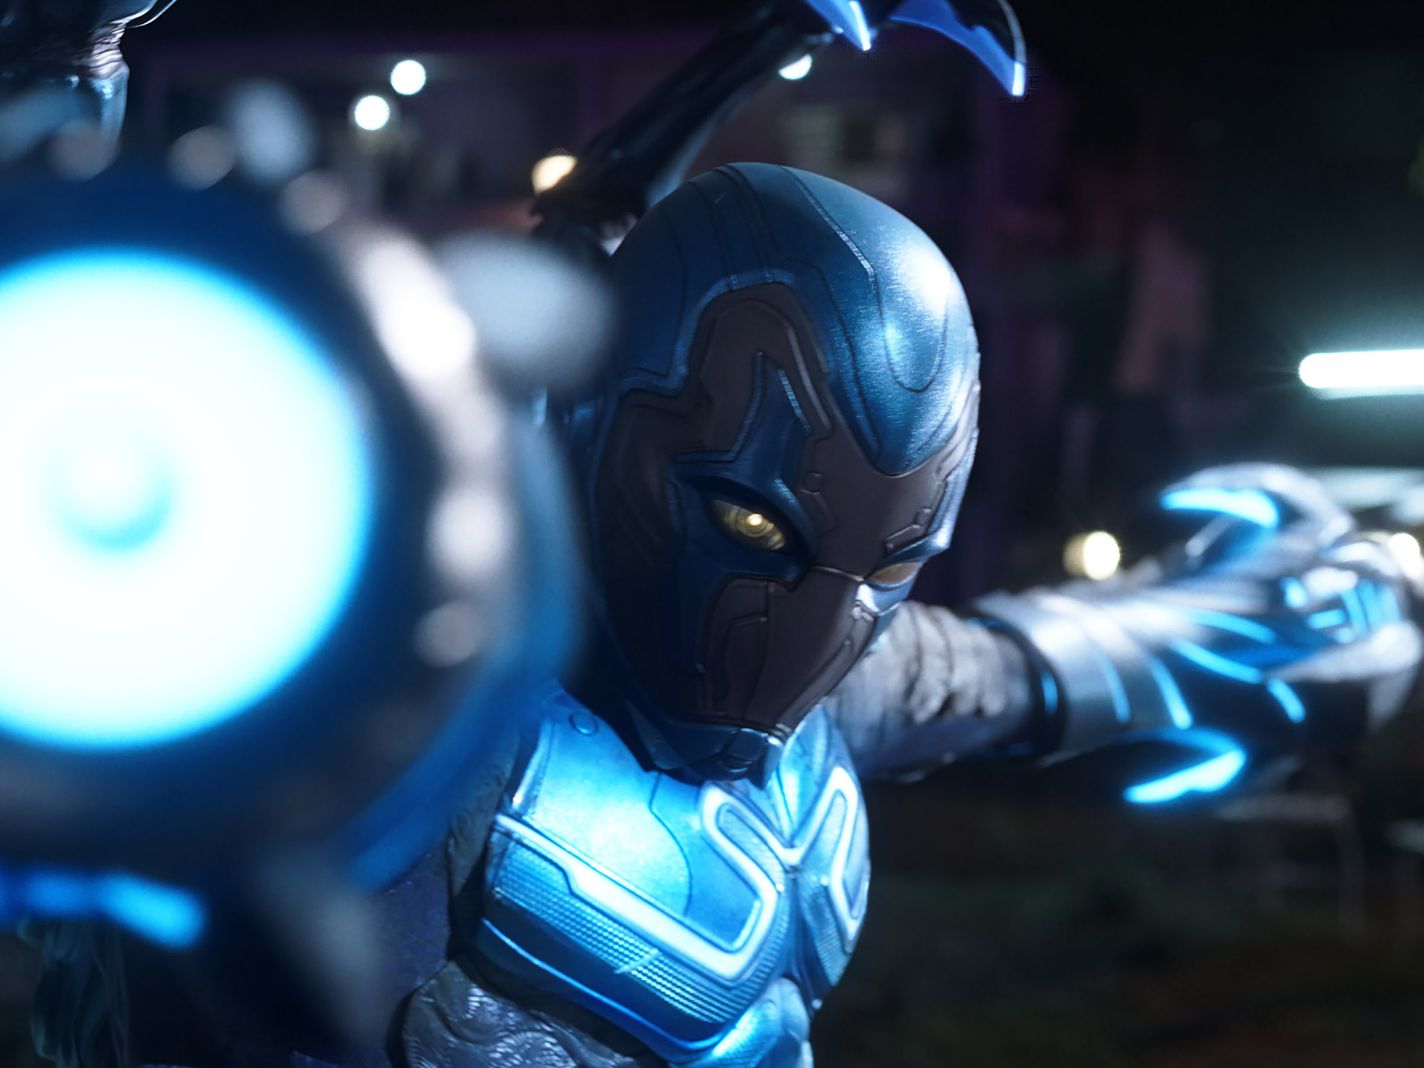 When Will 'Blue Beetle' Be Available on DVD, Digital & Streaming?